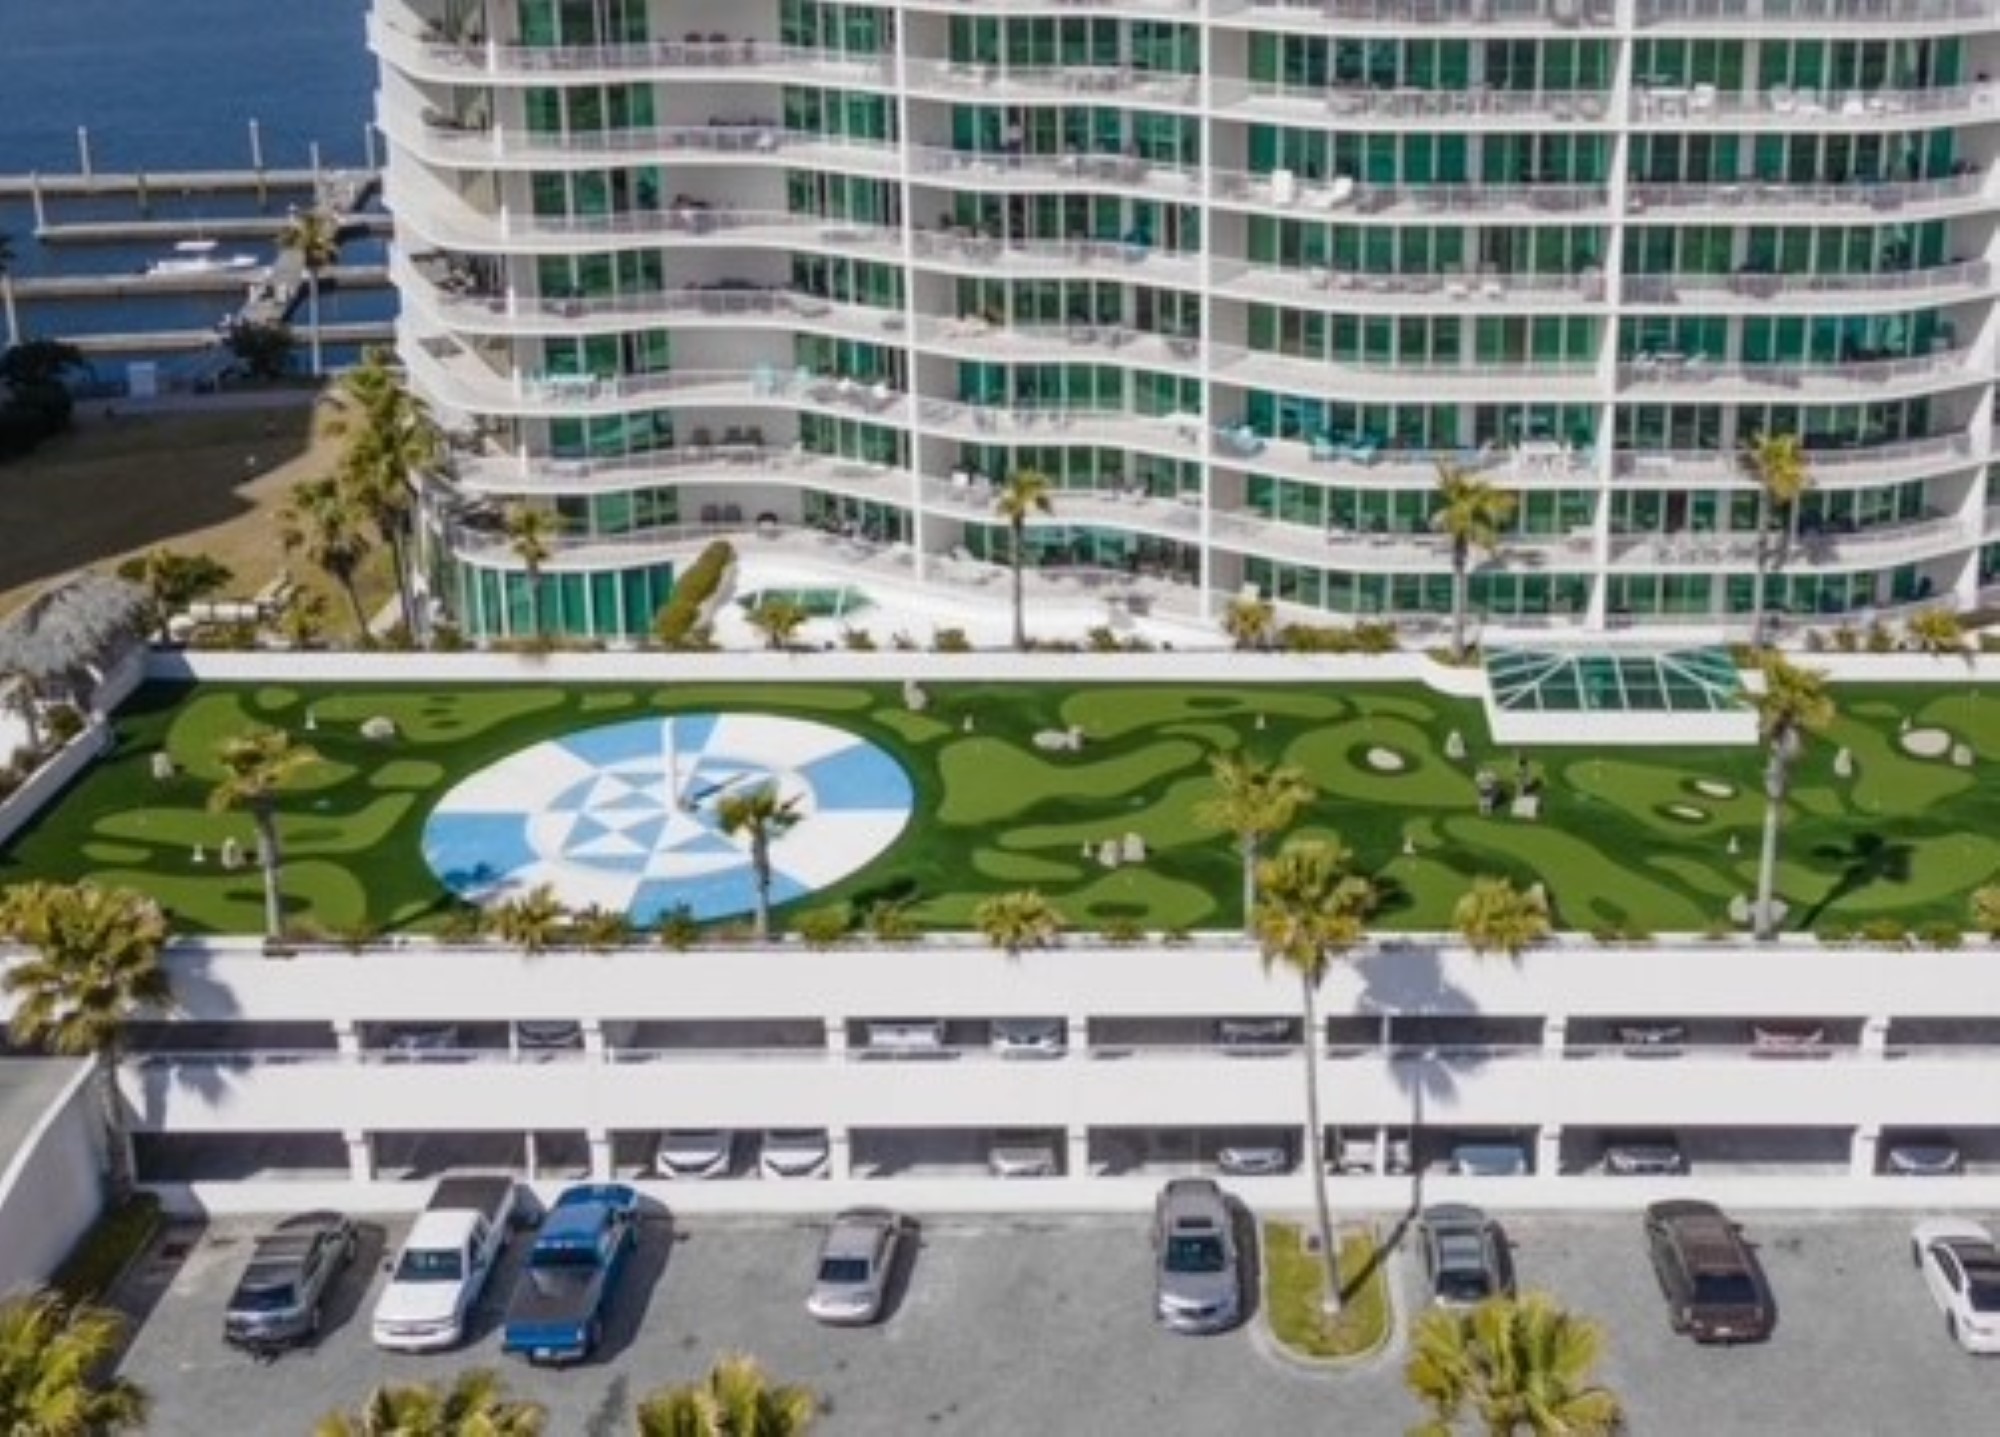 Caribe Resort mini golf course on rooftop of parking deck in front of 14-story guest room tower